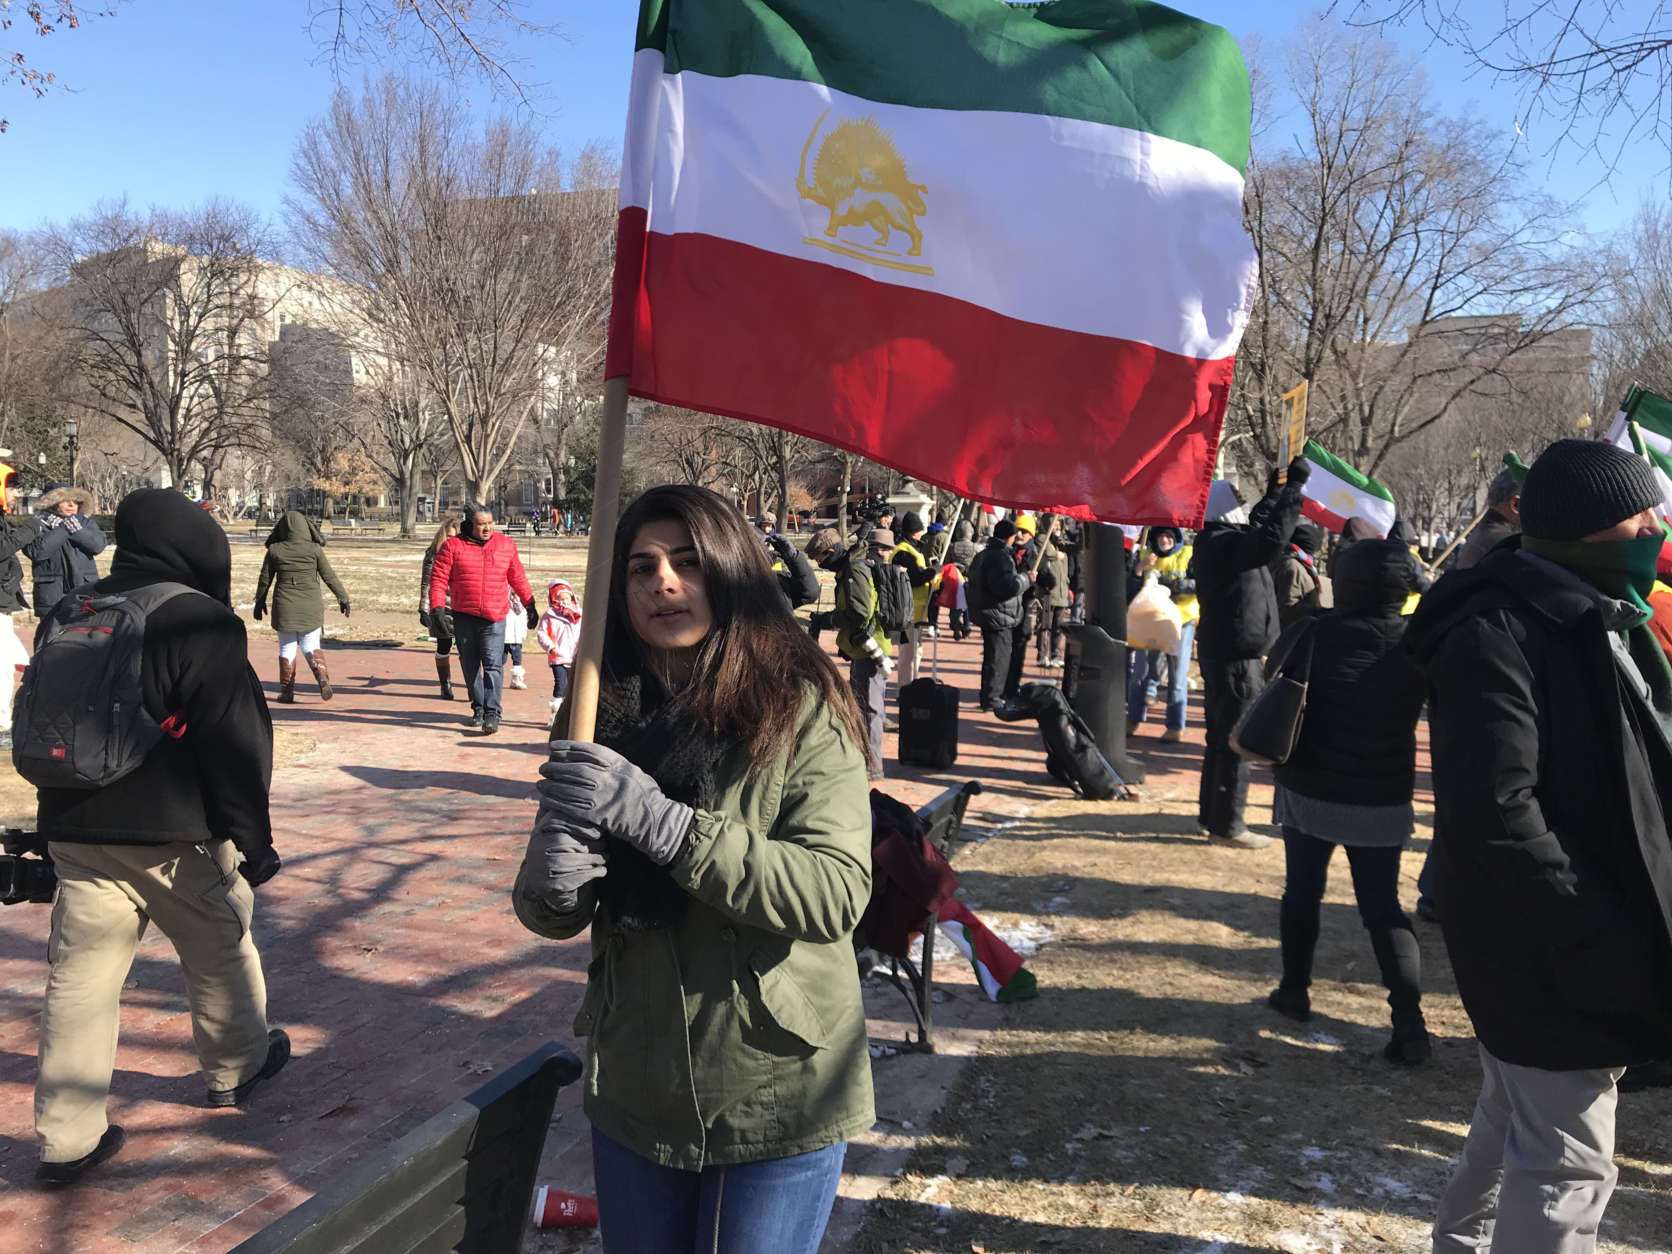 Iran has restricted social media and demonstrators are asking U.S. technology companies to keep the information flowing in the autocratic nation to aid anti-government demonstrators. (WTOP/Dick Uliano) 